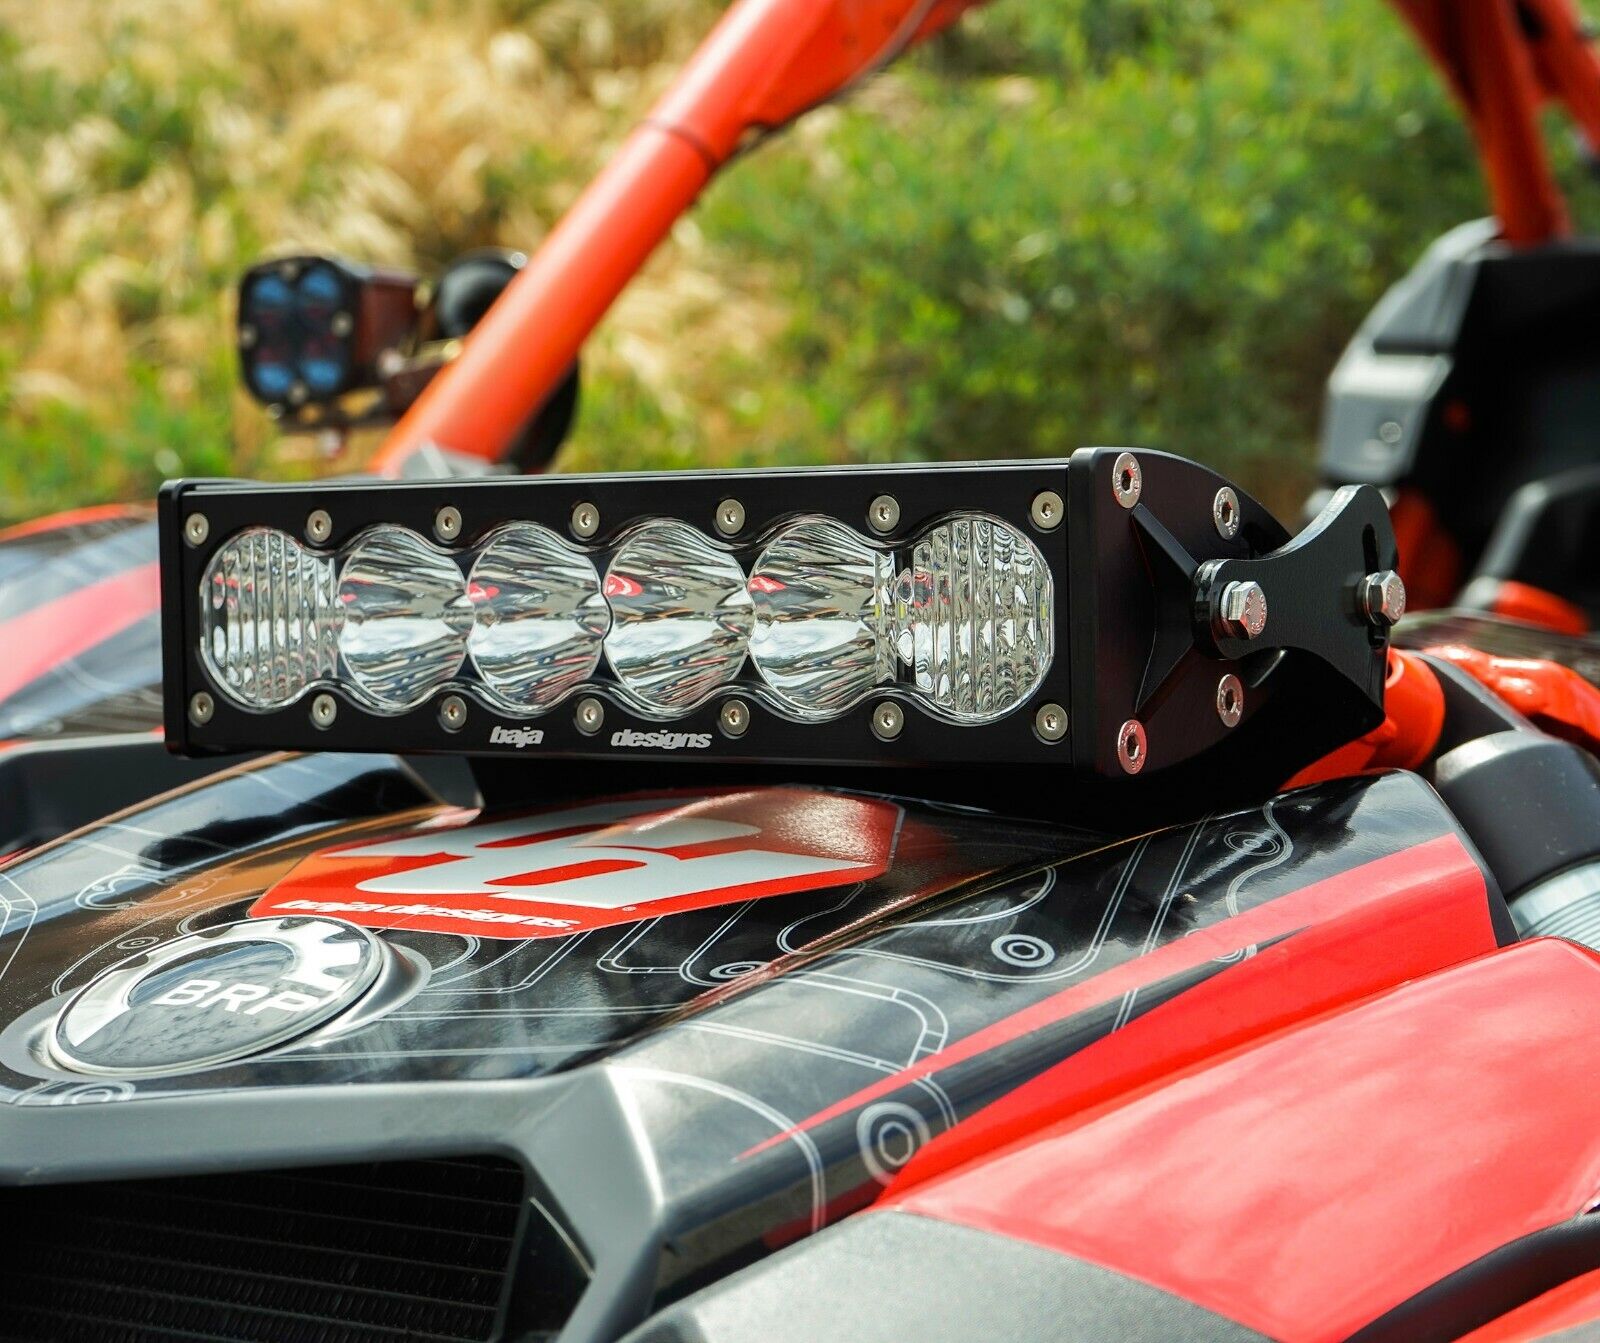 Baja Designs 447089 Can-Am OnX6+ LED Clear White 10″ Inch Shock Mount Light Bar Kit – CanAm